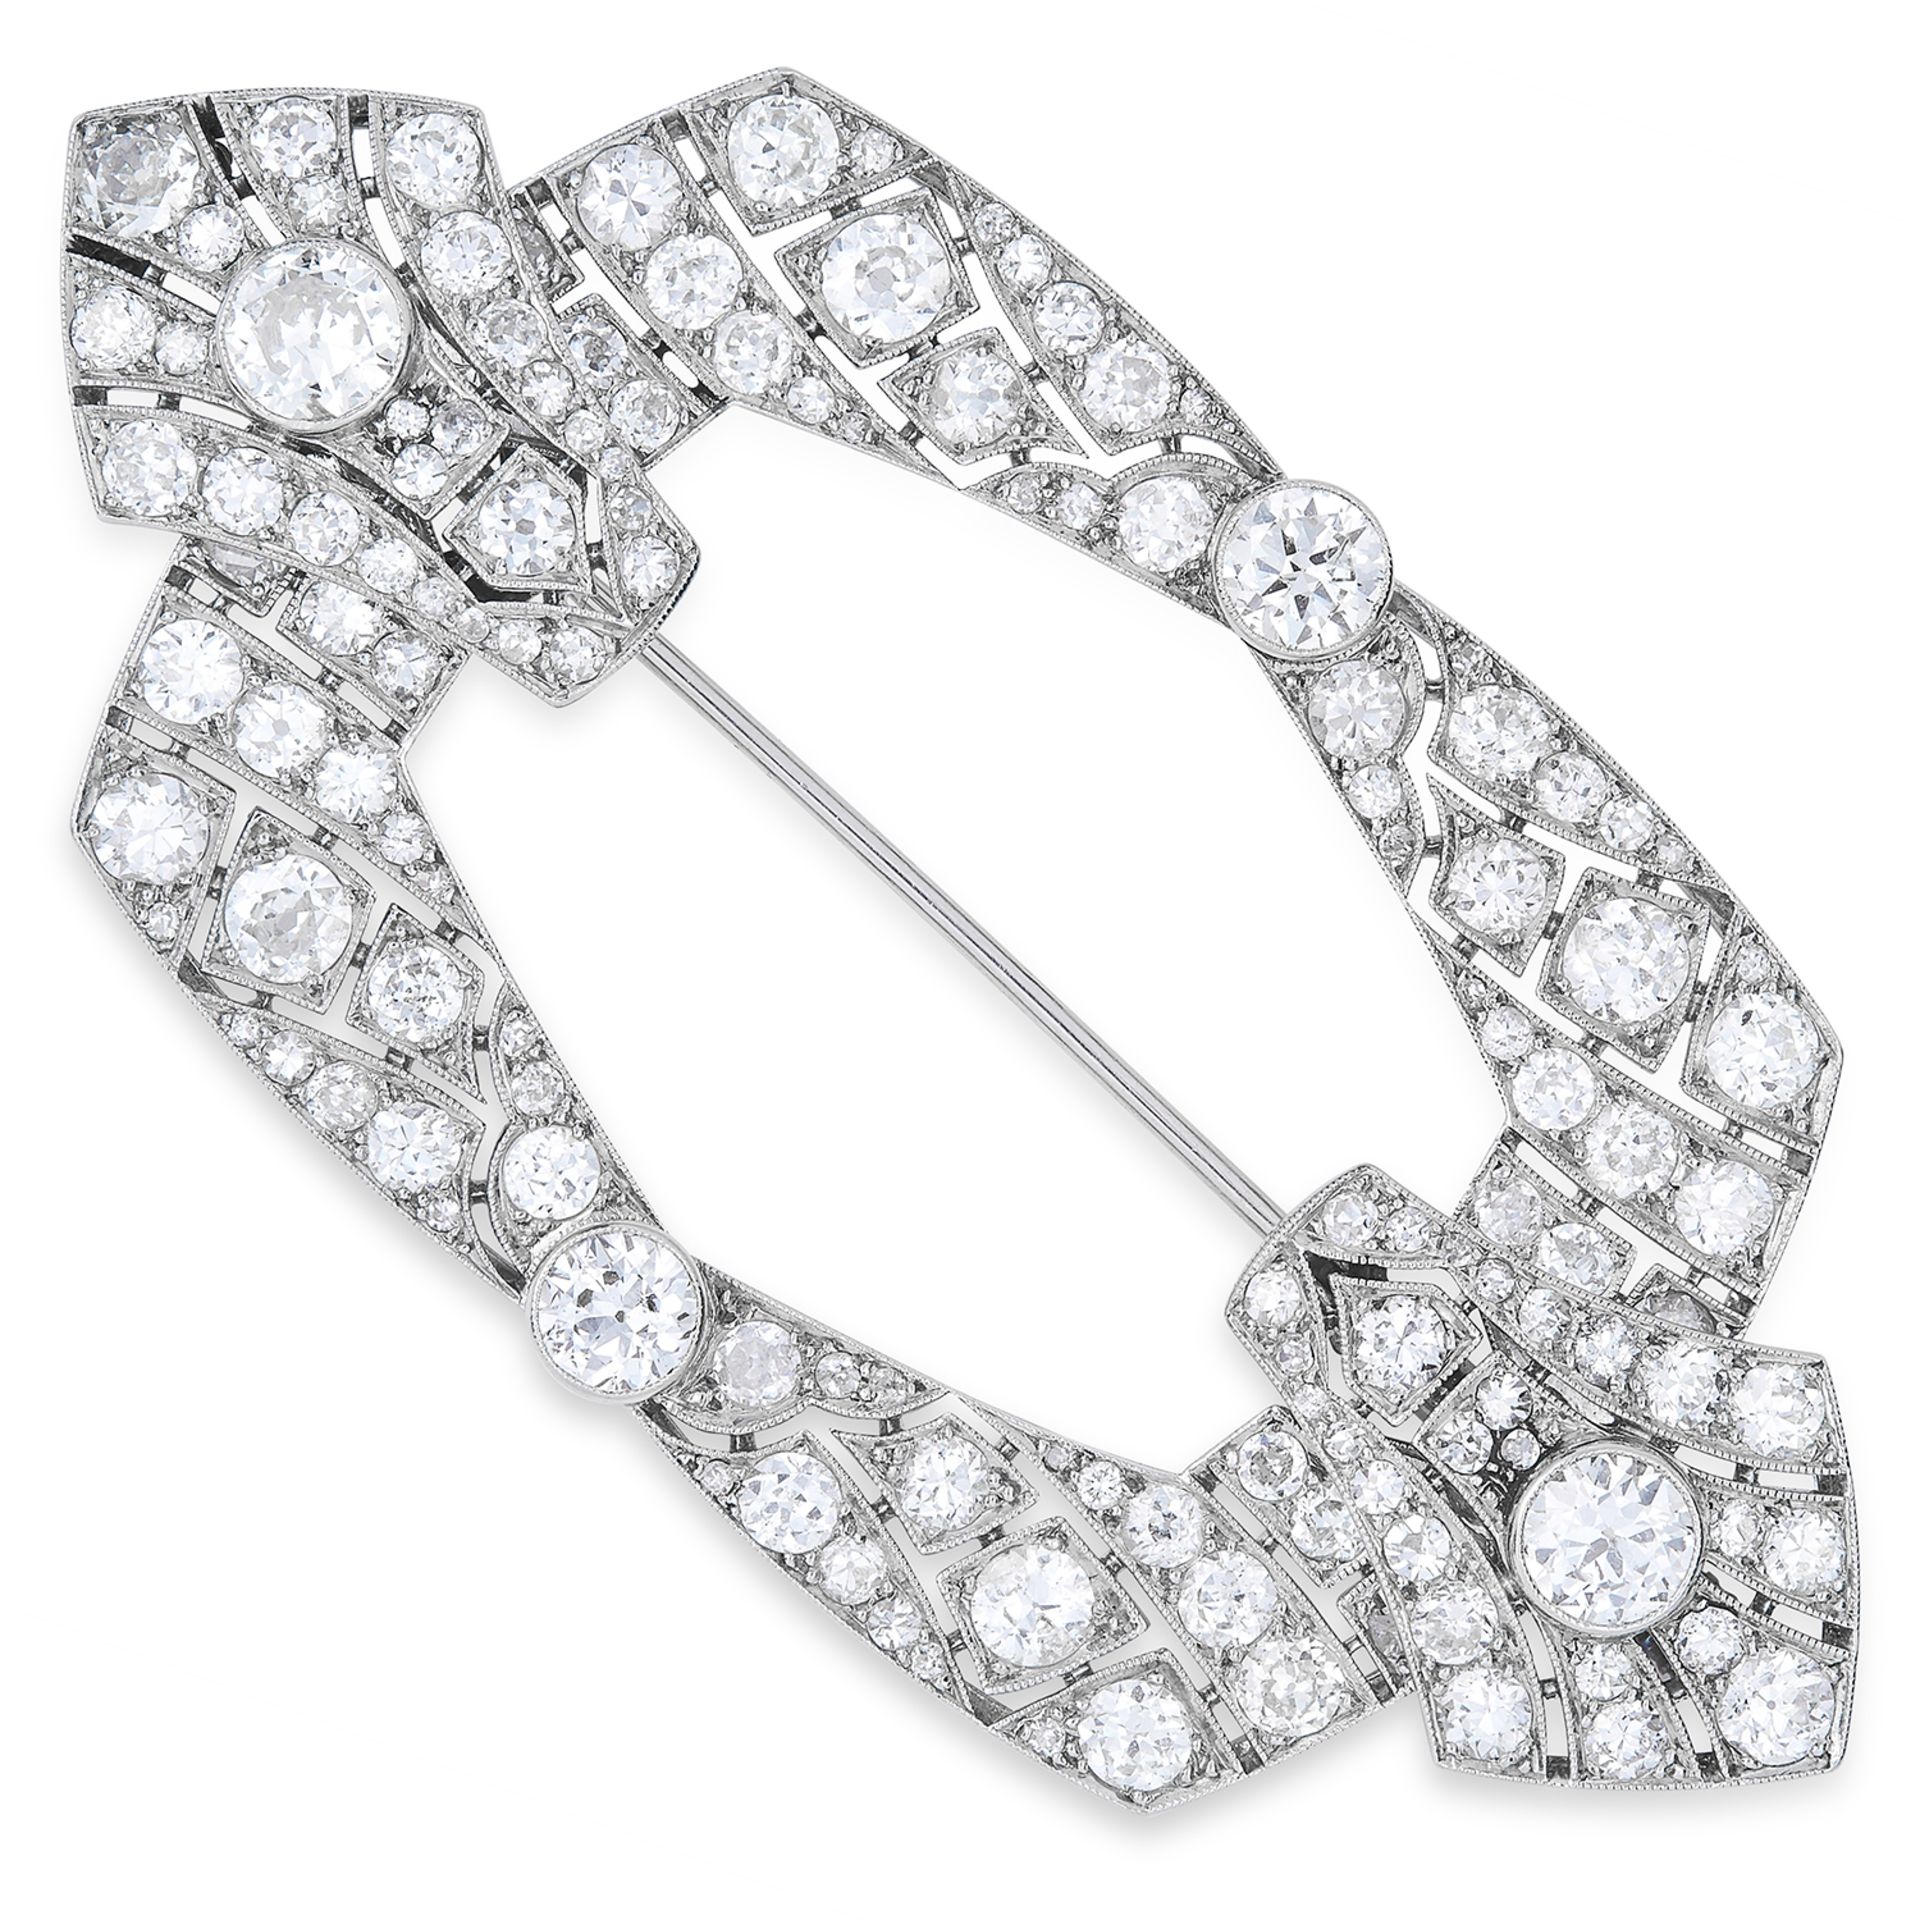 INTERCHANGEABLE DIAMOND BROOCH in Art Deco design, set with round cut diamonds, on articulated